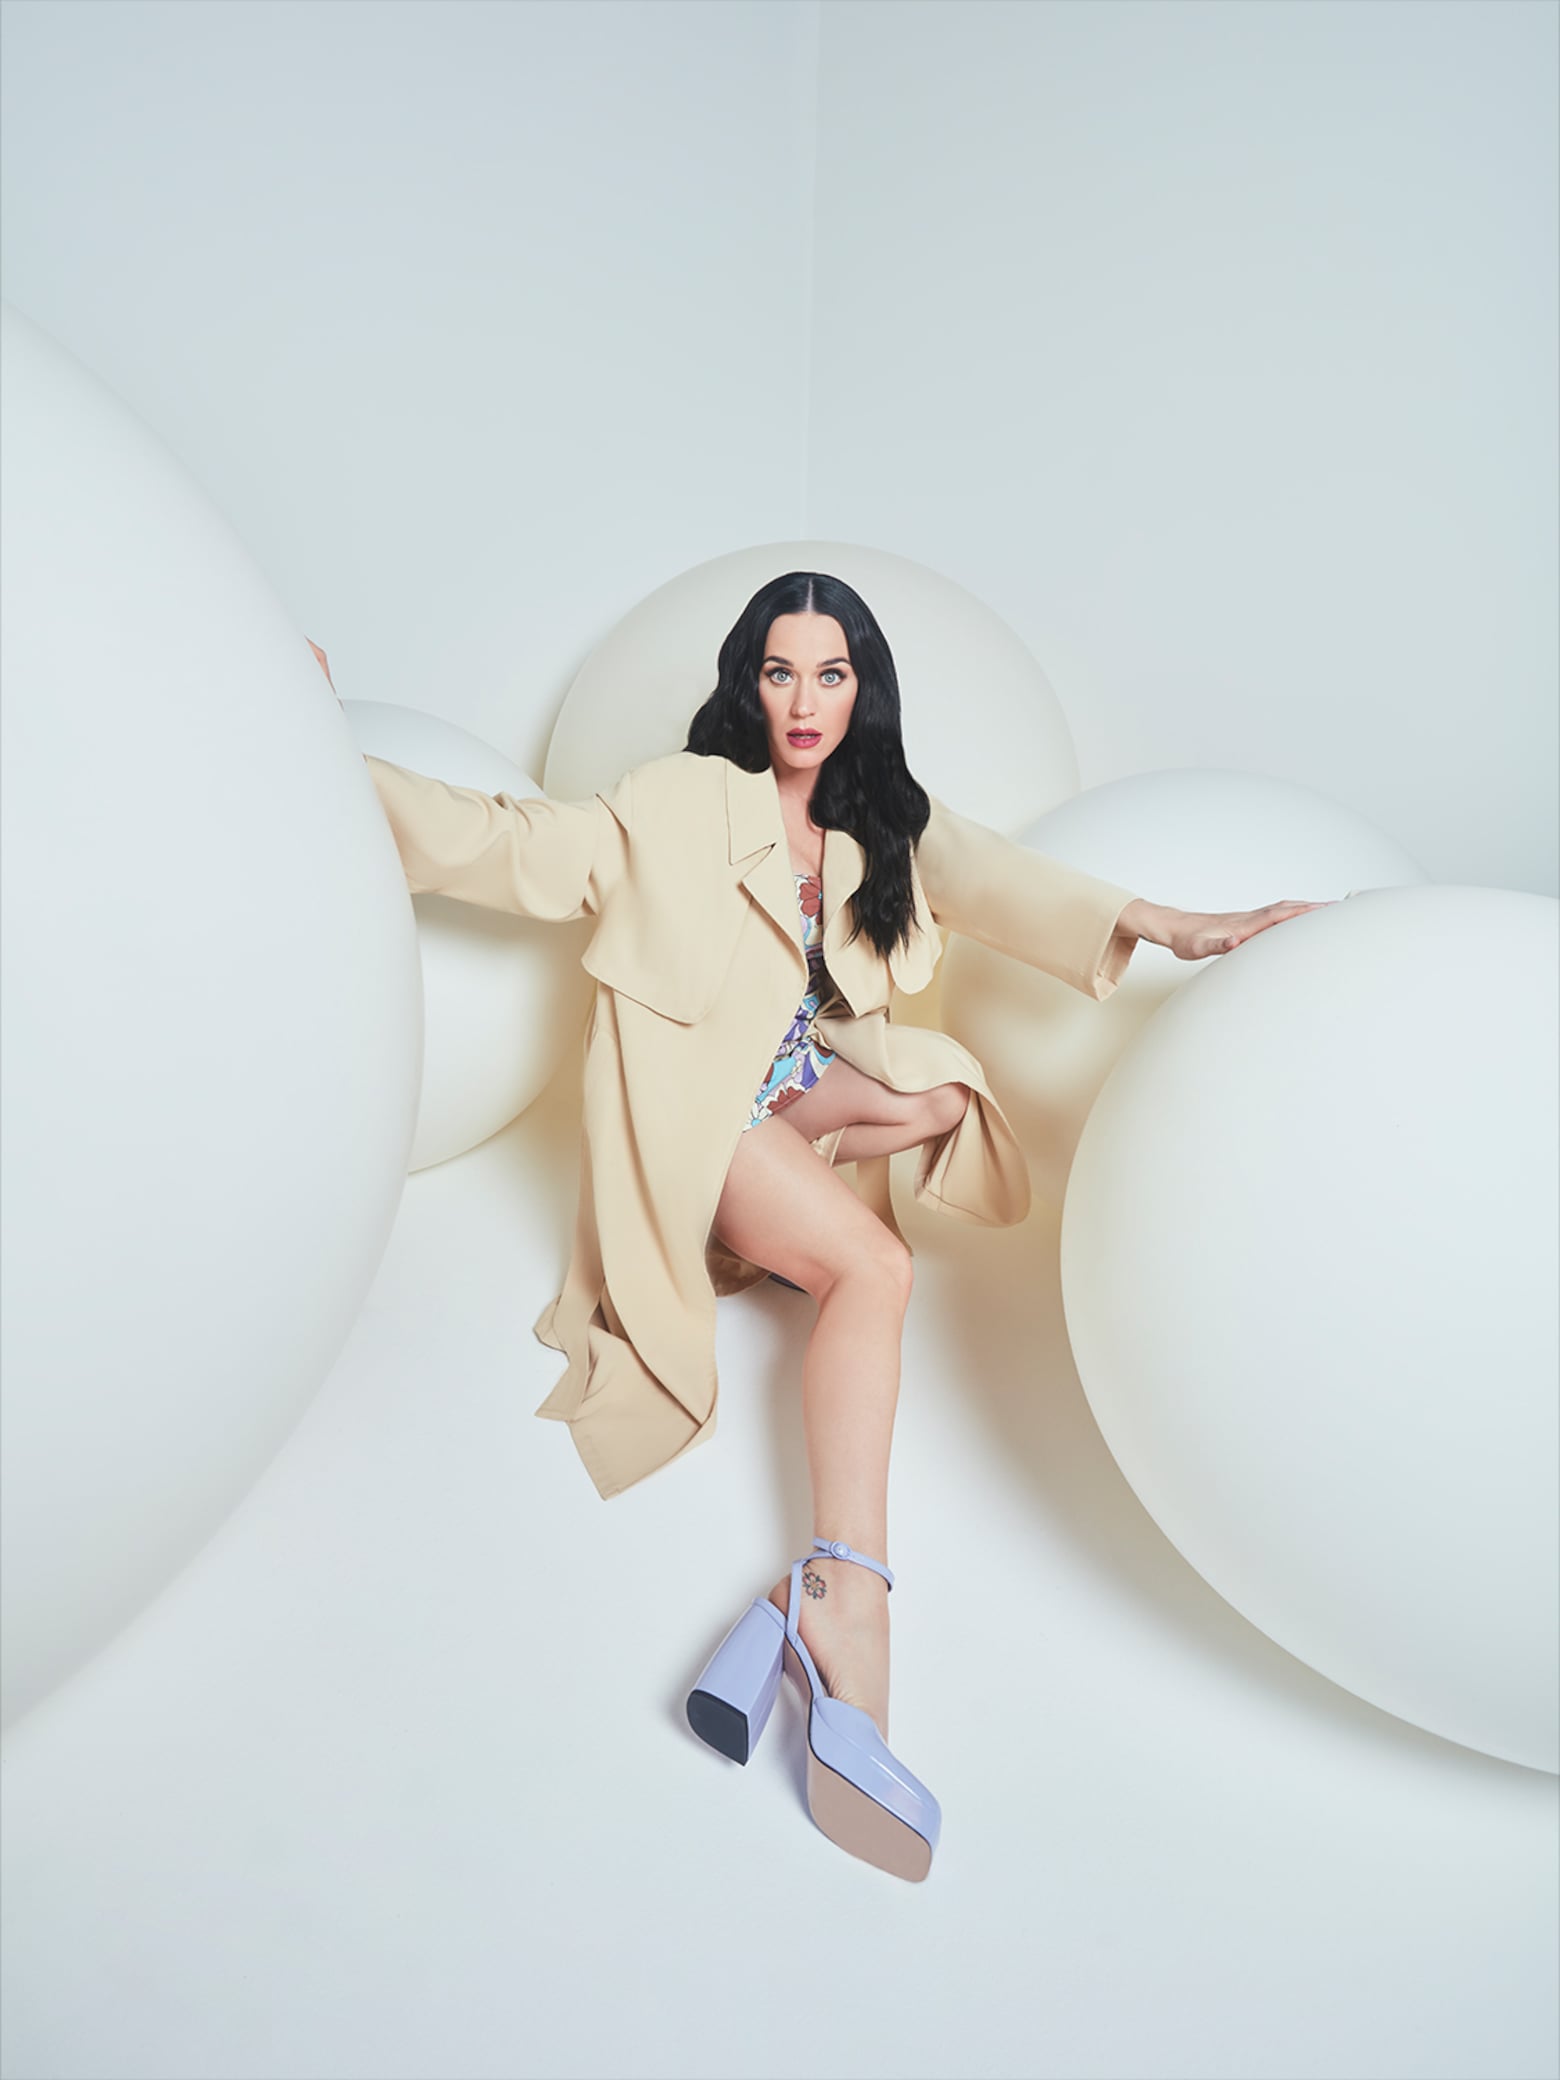 Ontdek nu de nieuwe collectie Katy Perry co-created by ABOUT YOU